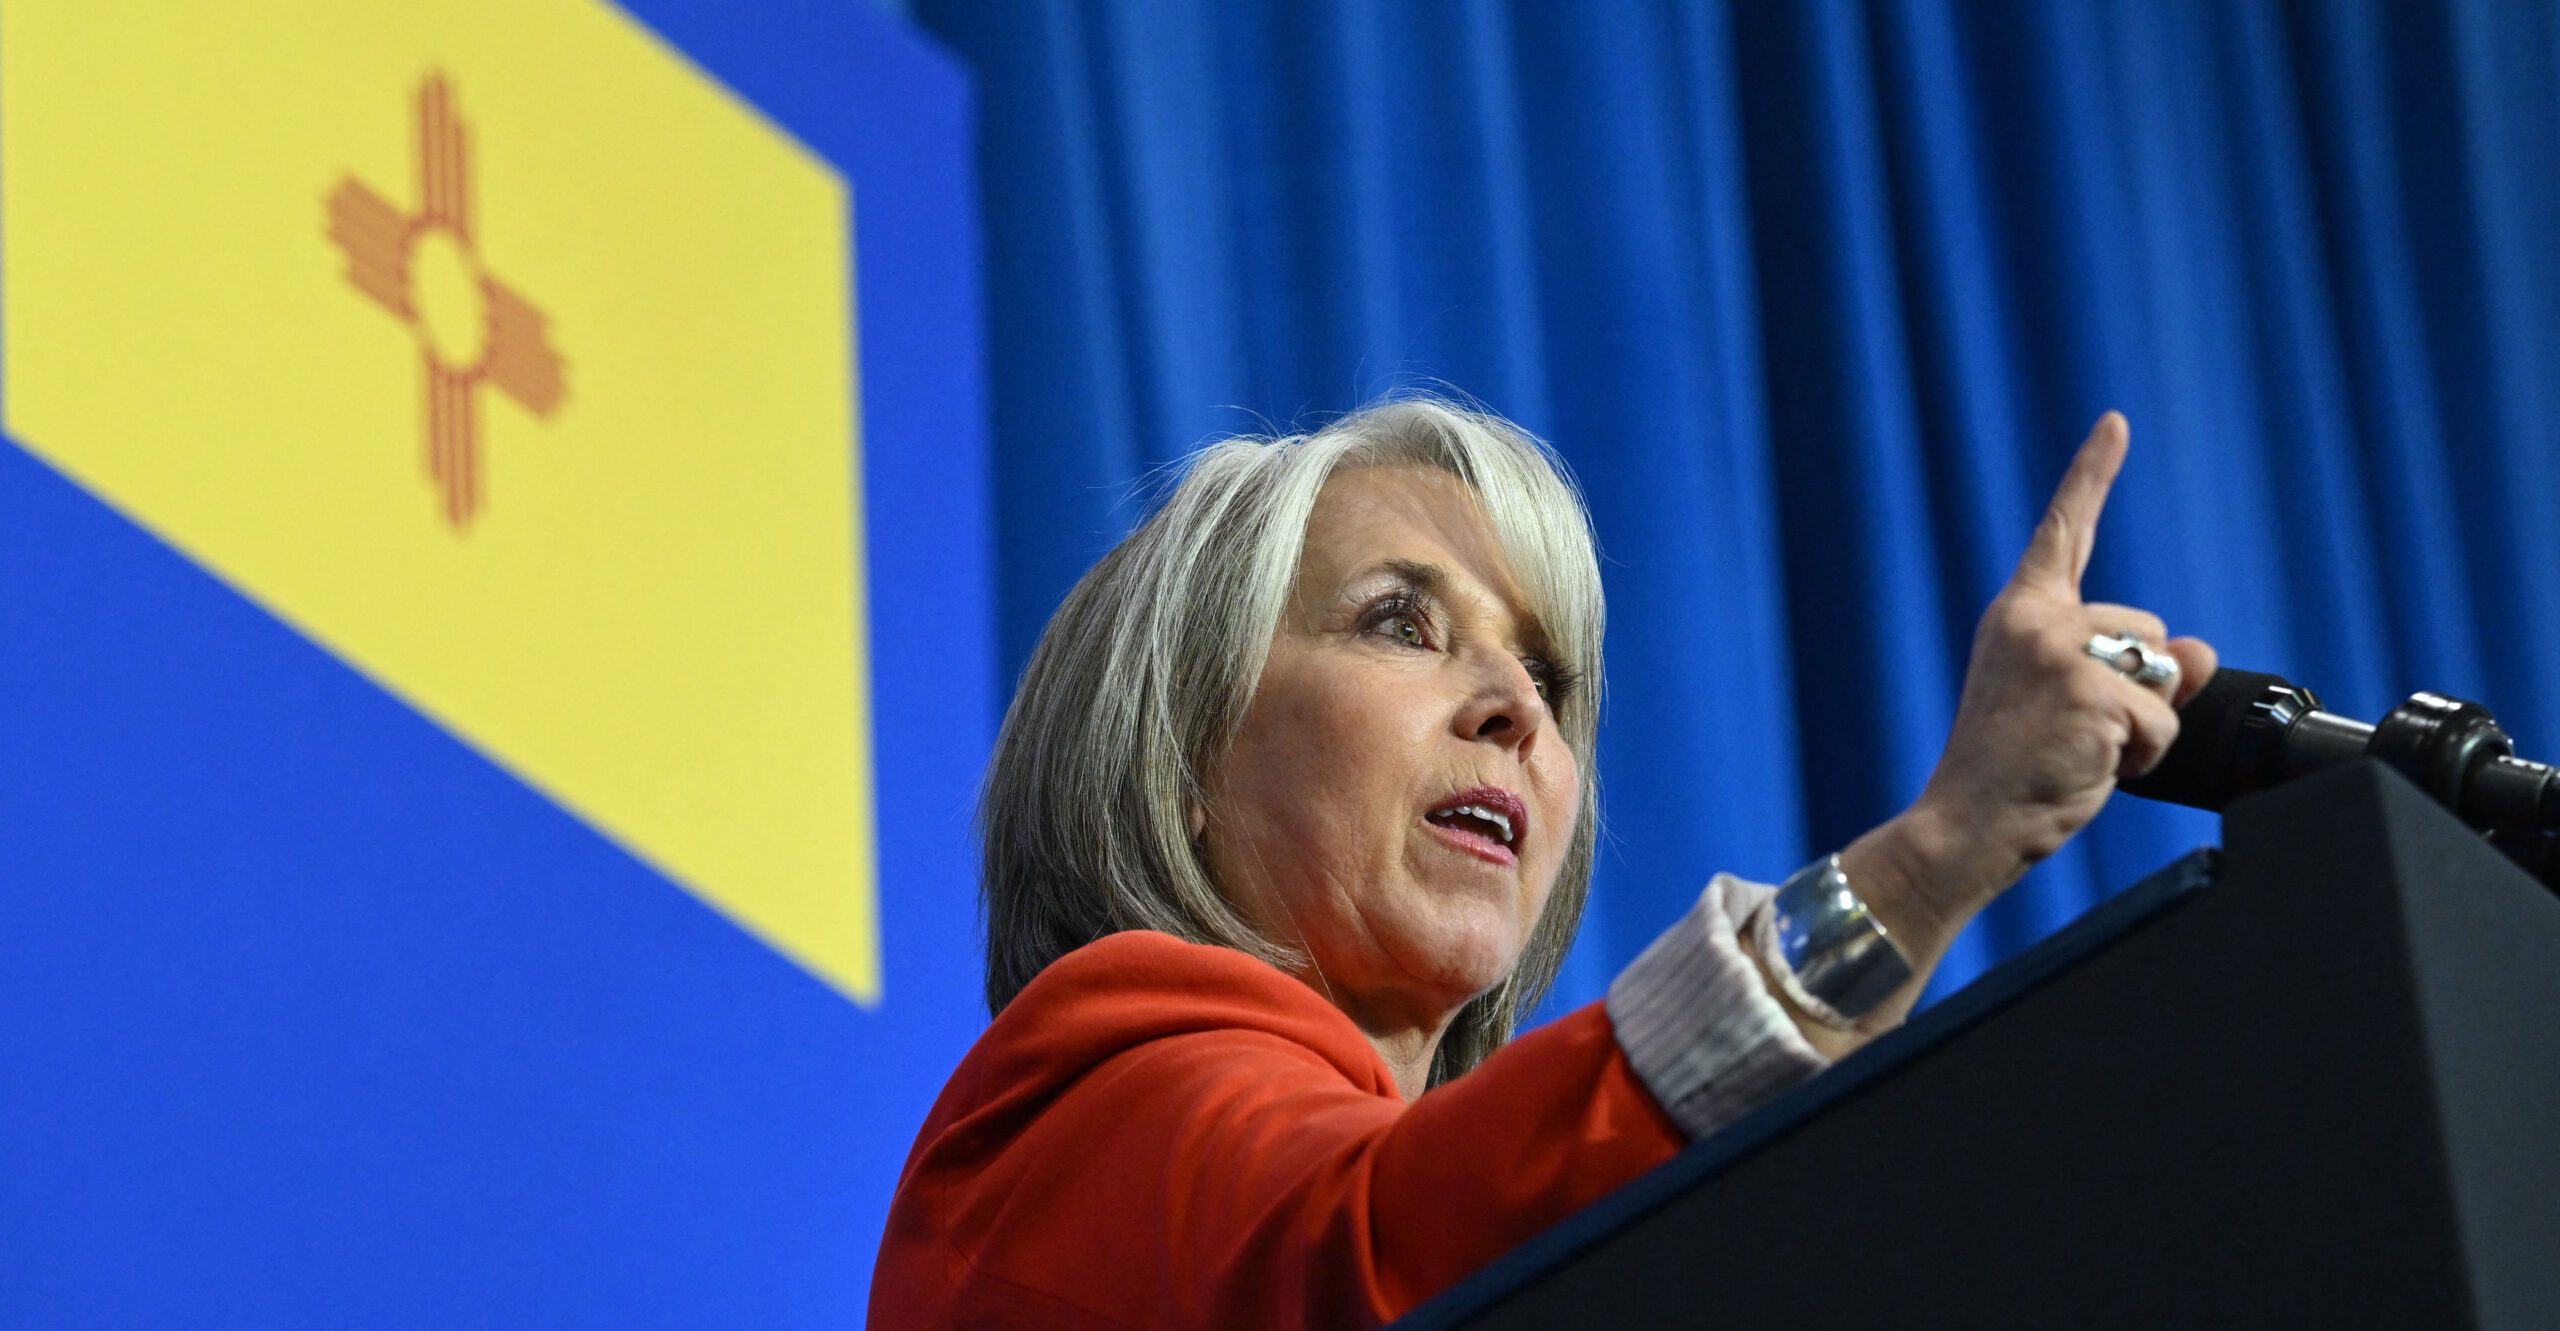 ICYMI: 5 Things to Know About New Mexico Governor's Insanely Unconstitutional Gun Control Order